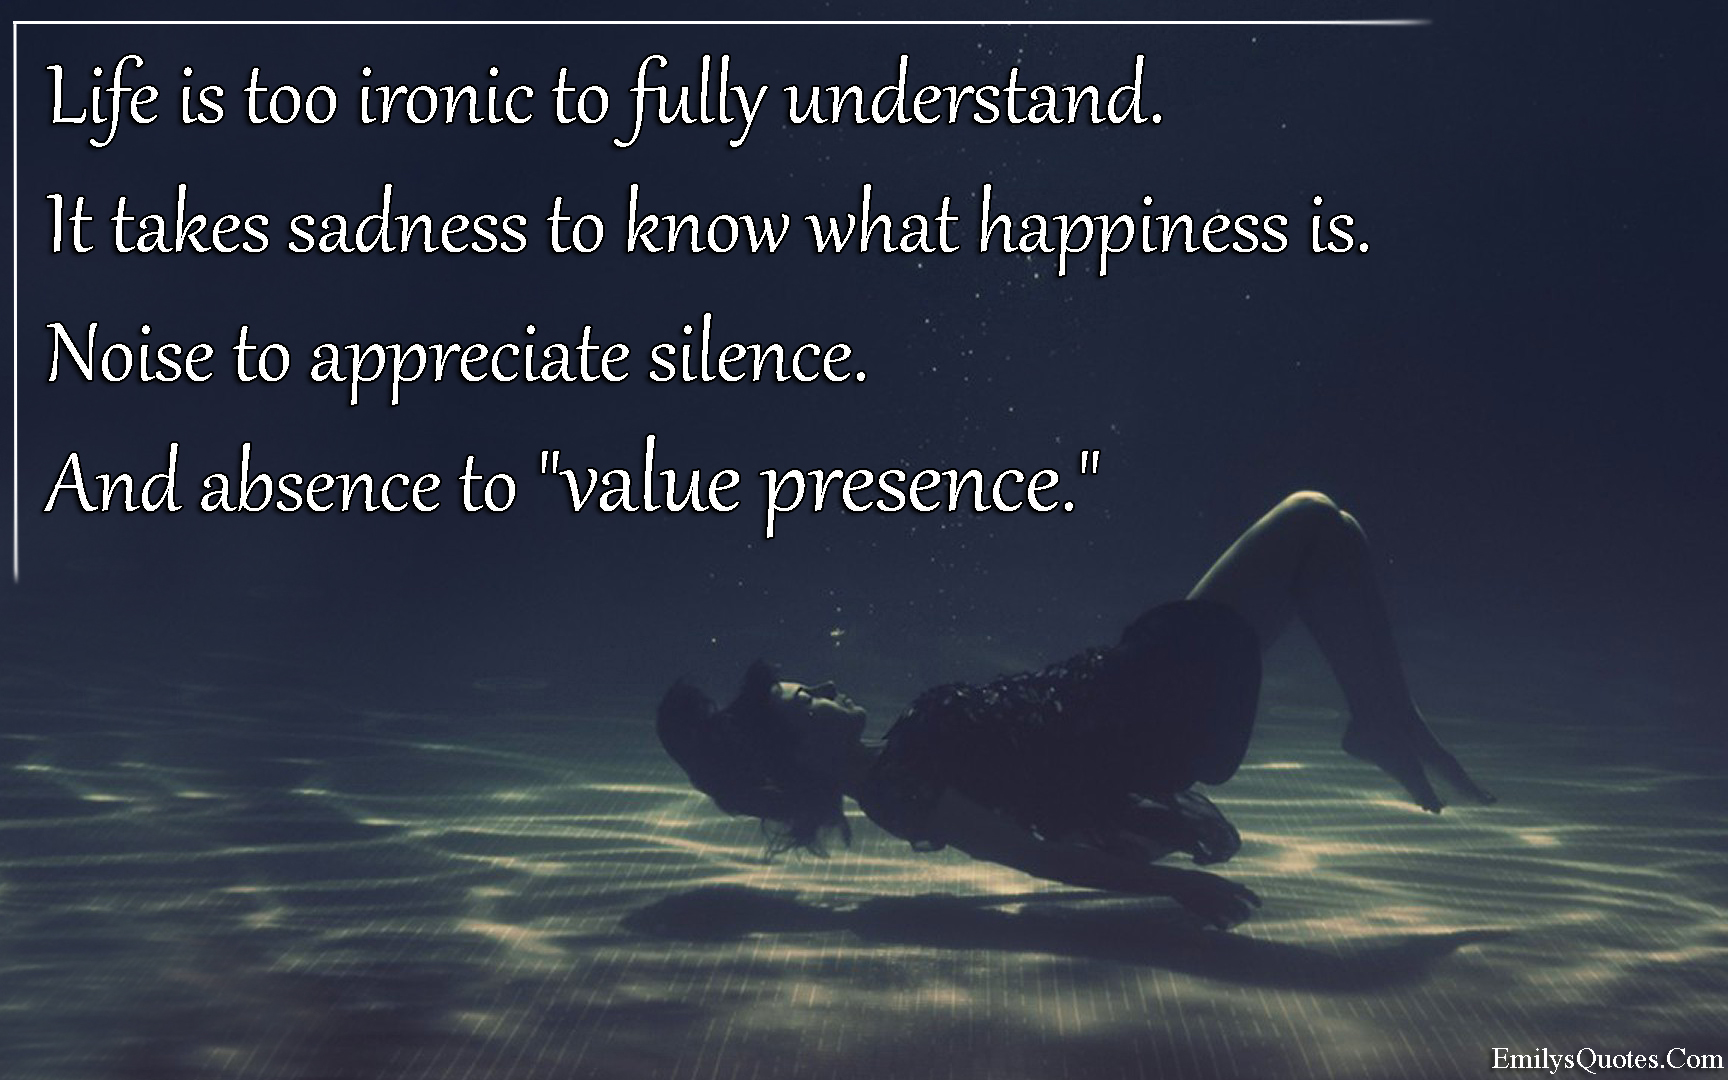 Life is too ironic to fully understand.  It takes sadness to know what happiness is.  Noise to appreciate silence.  And absence to “value presence.”